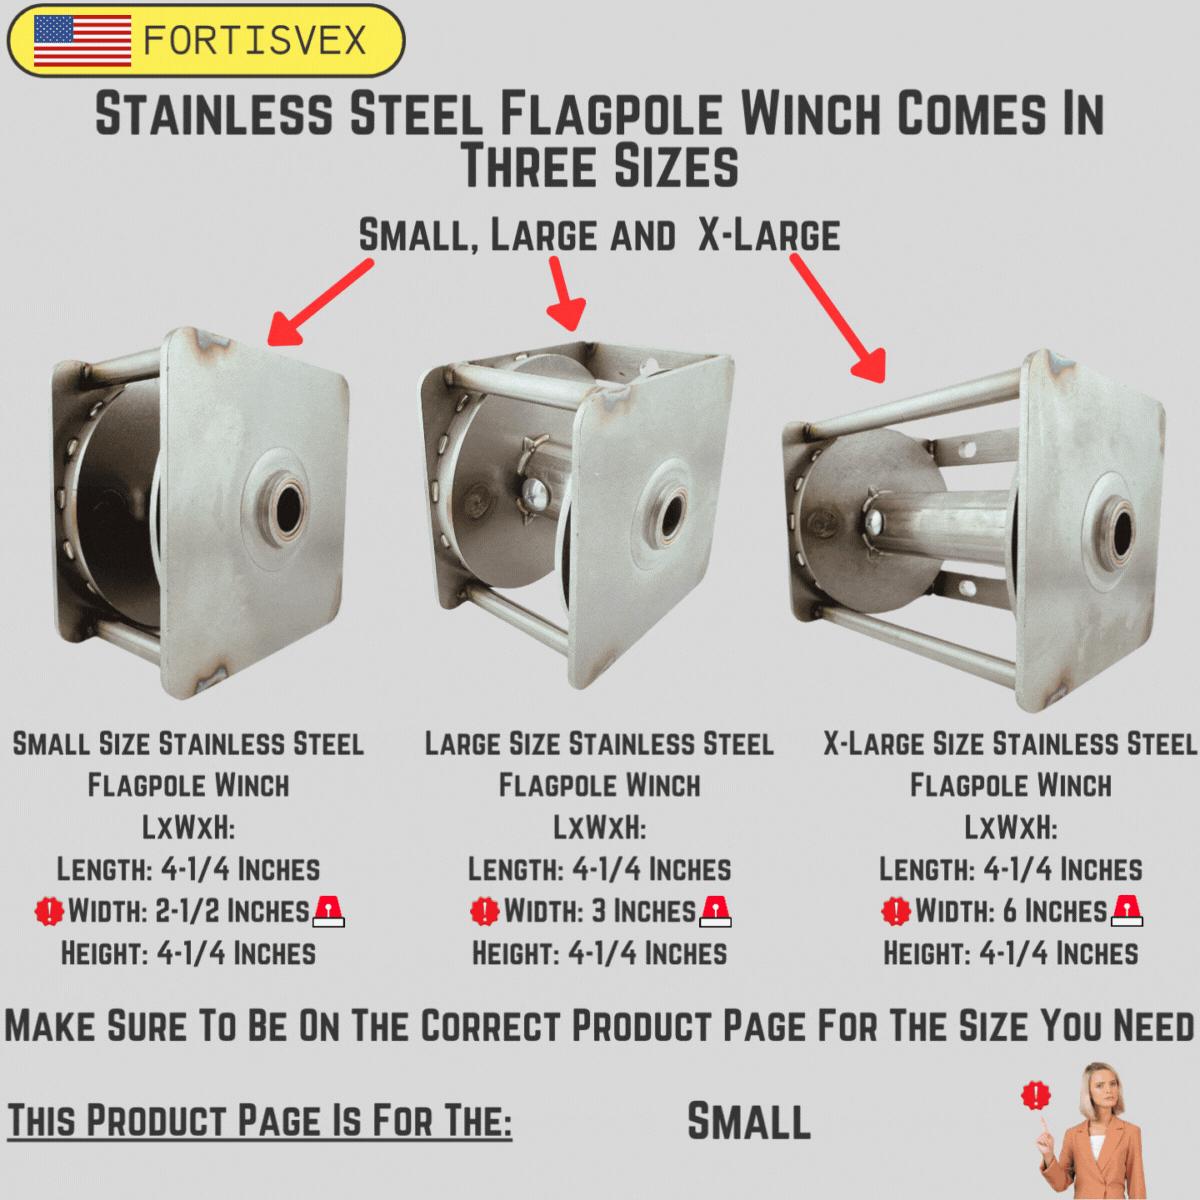 Small Size Stainless Steel Flagpole Winch 360047